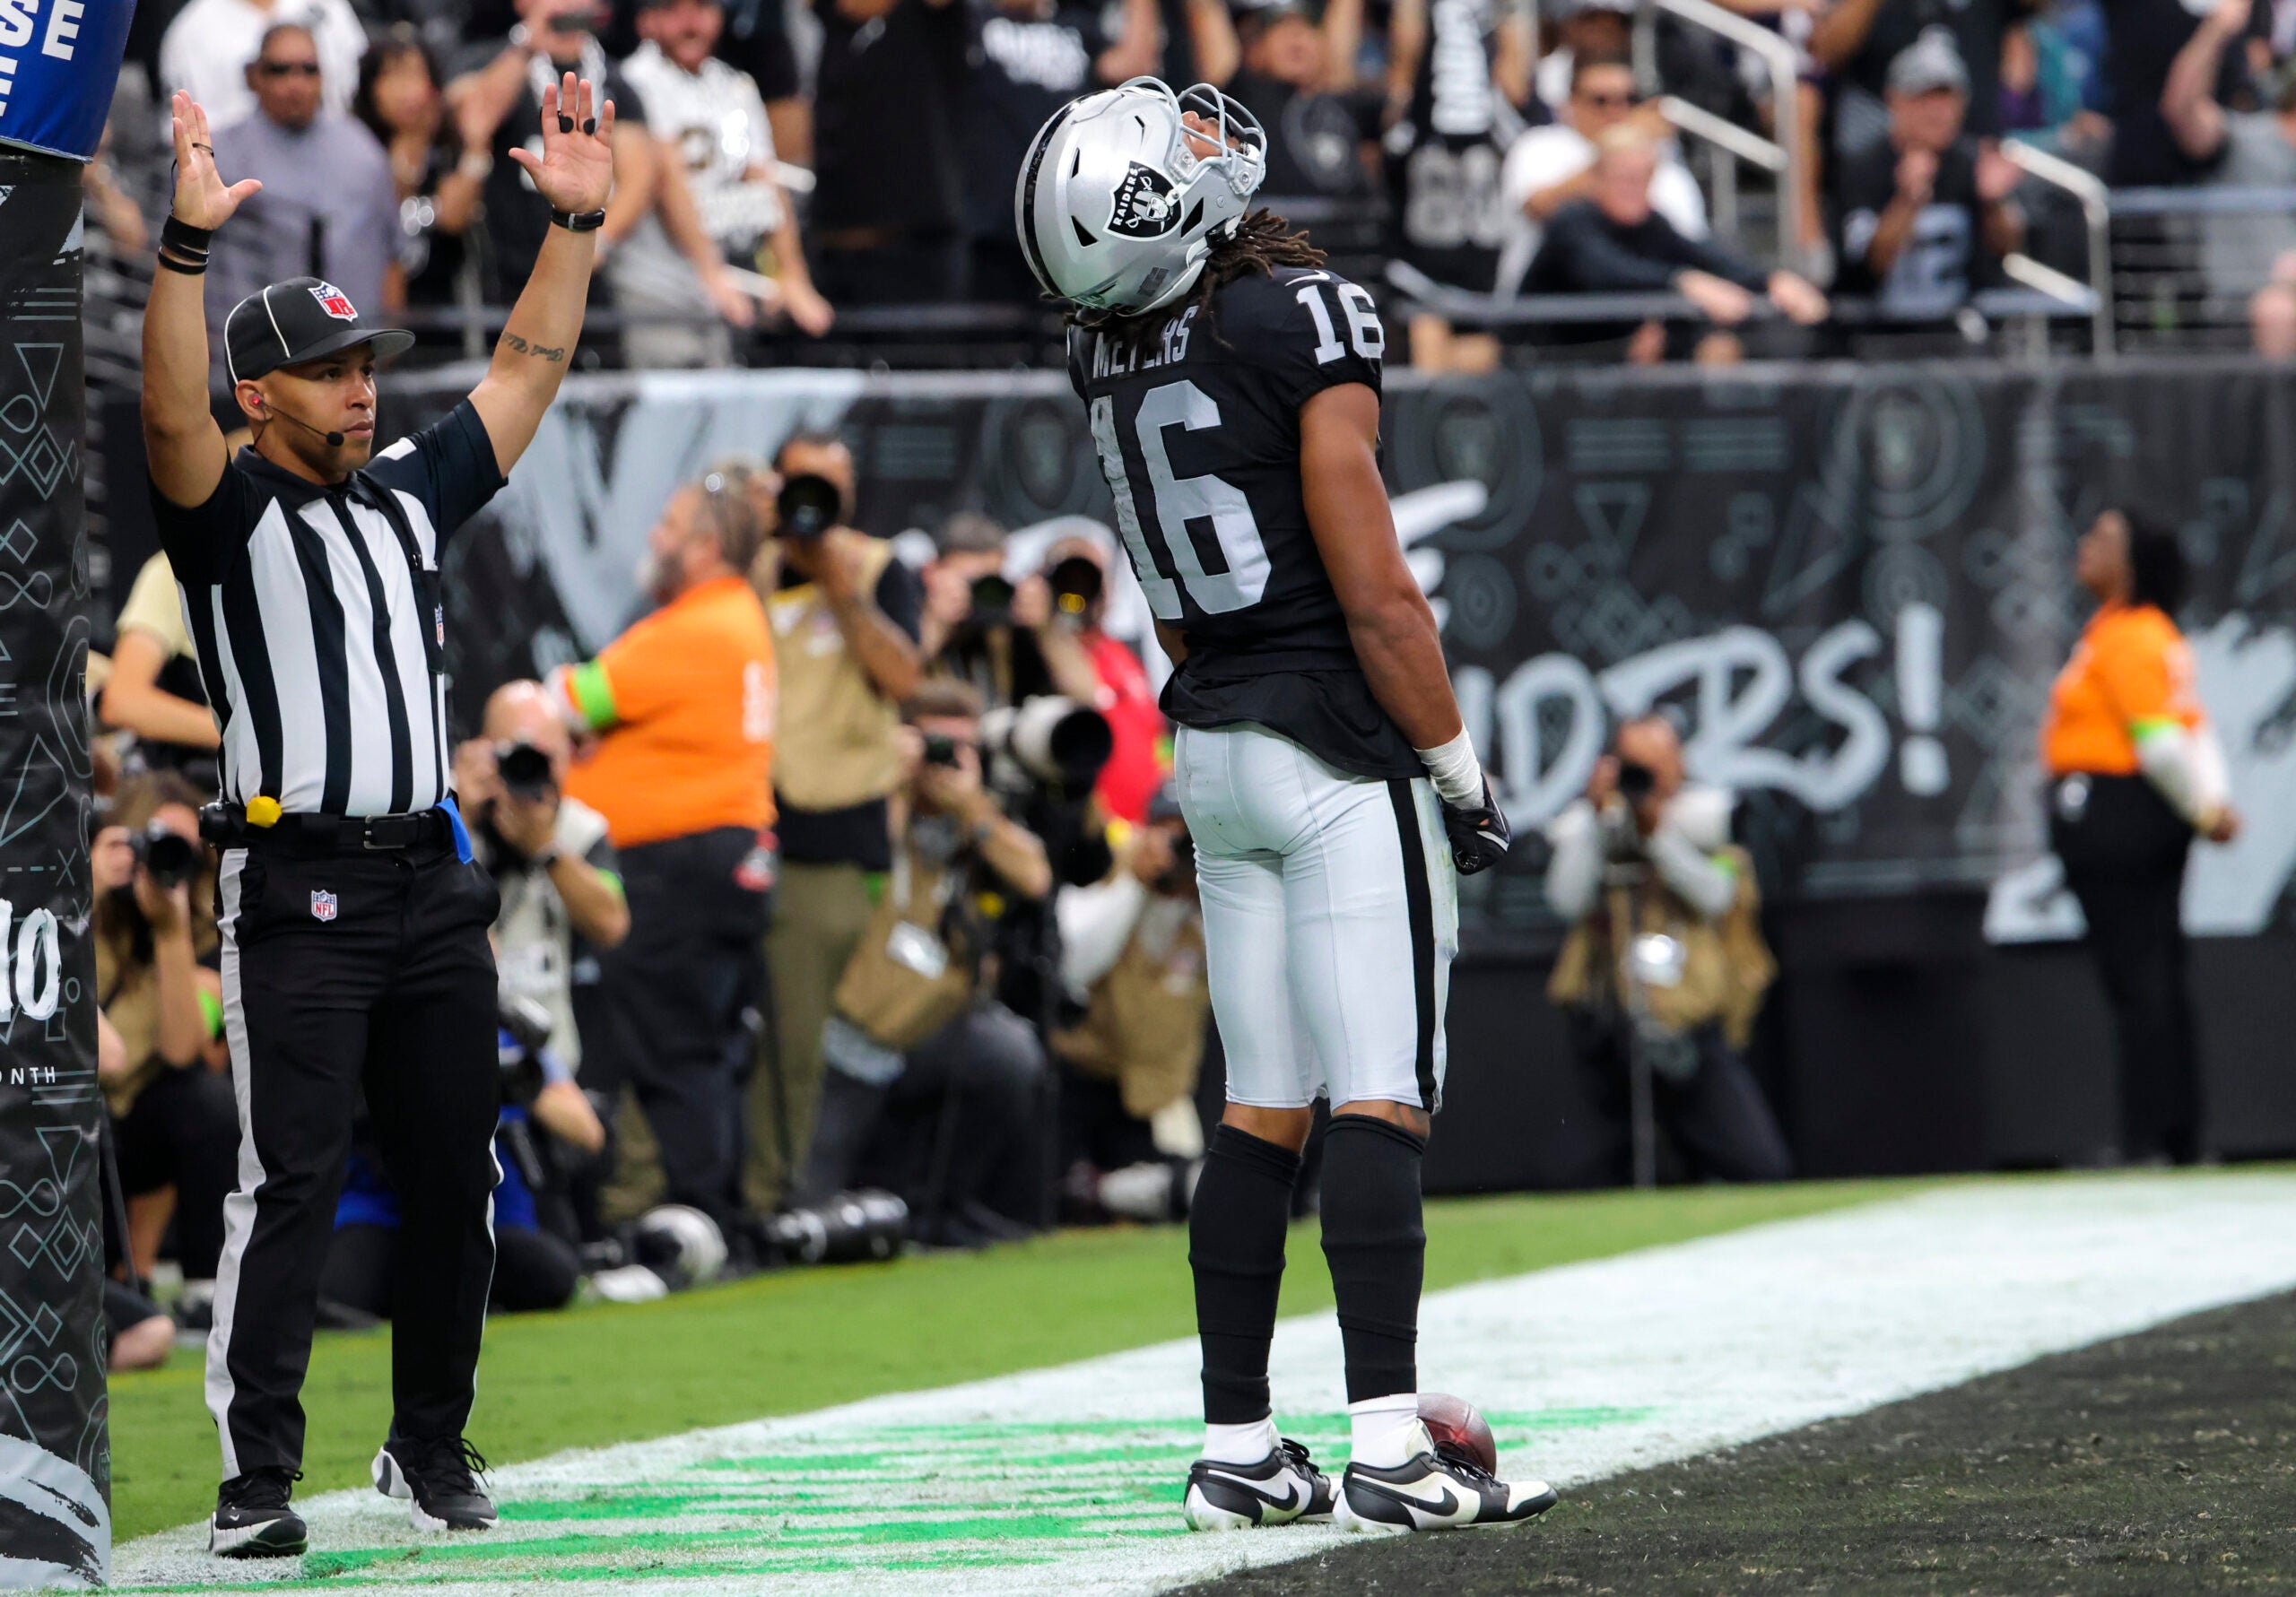 Las Vegas Raiders Jakobi Meyers reacting after his touchdown reception against the New England Patriots.